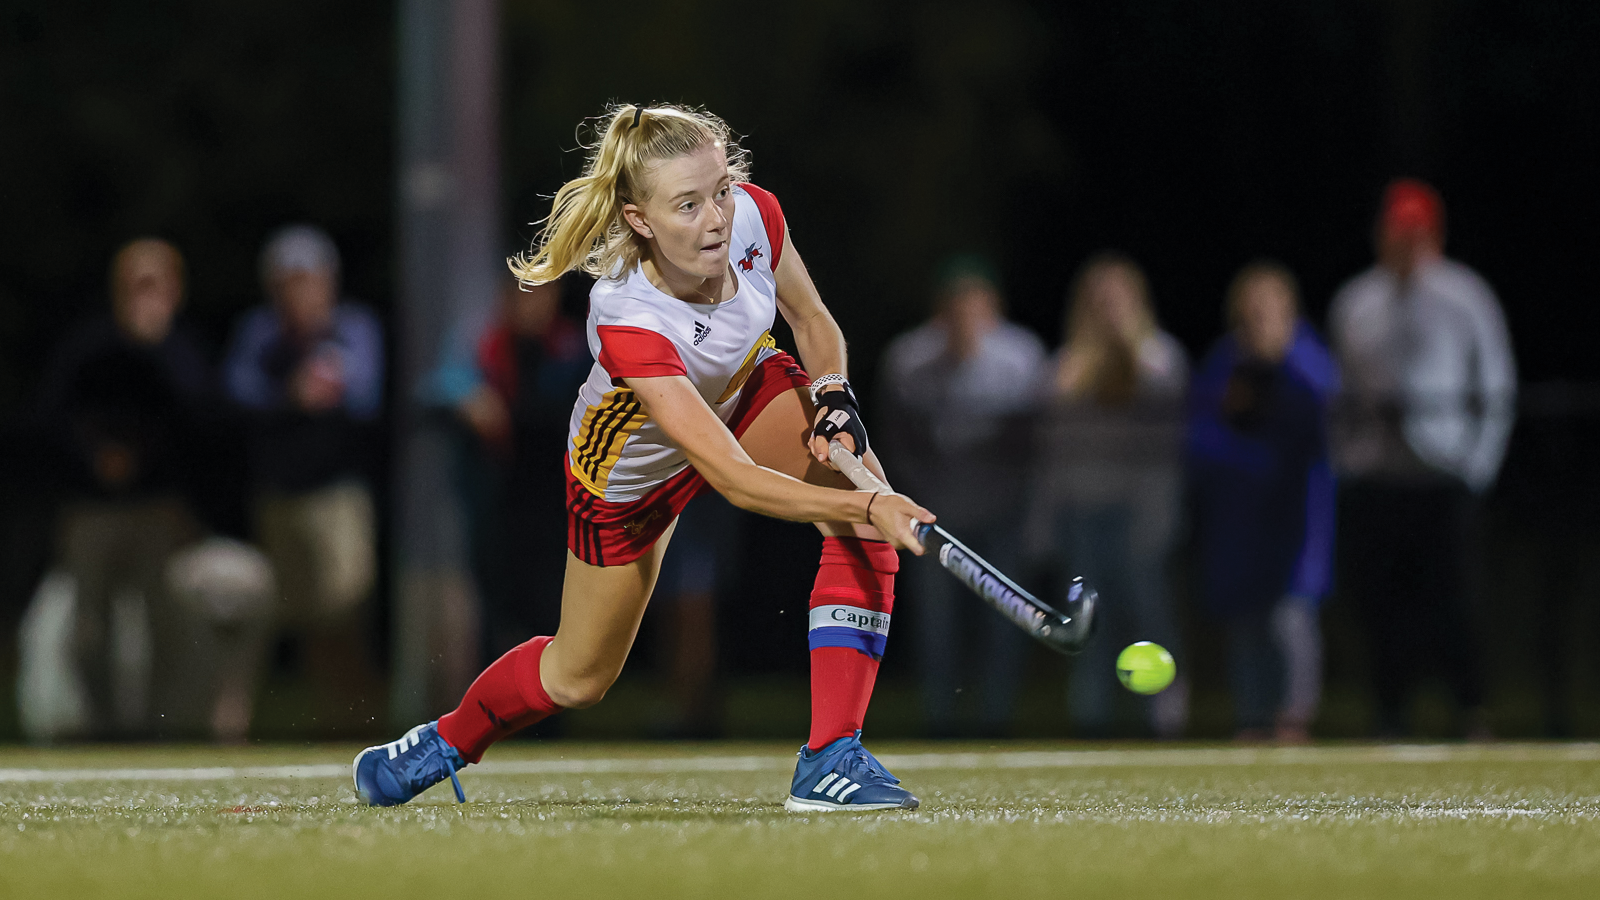 Action photo of Guelph field hockey player Elly Peters shooting the ball during a game